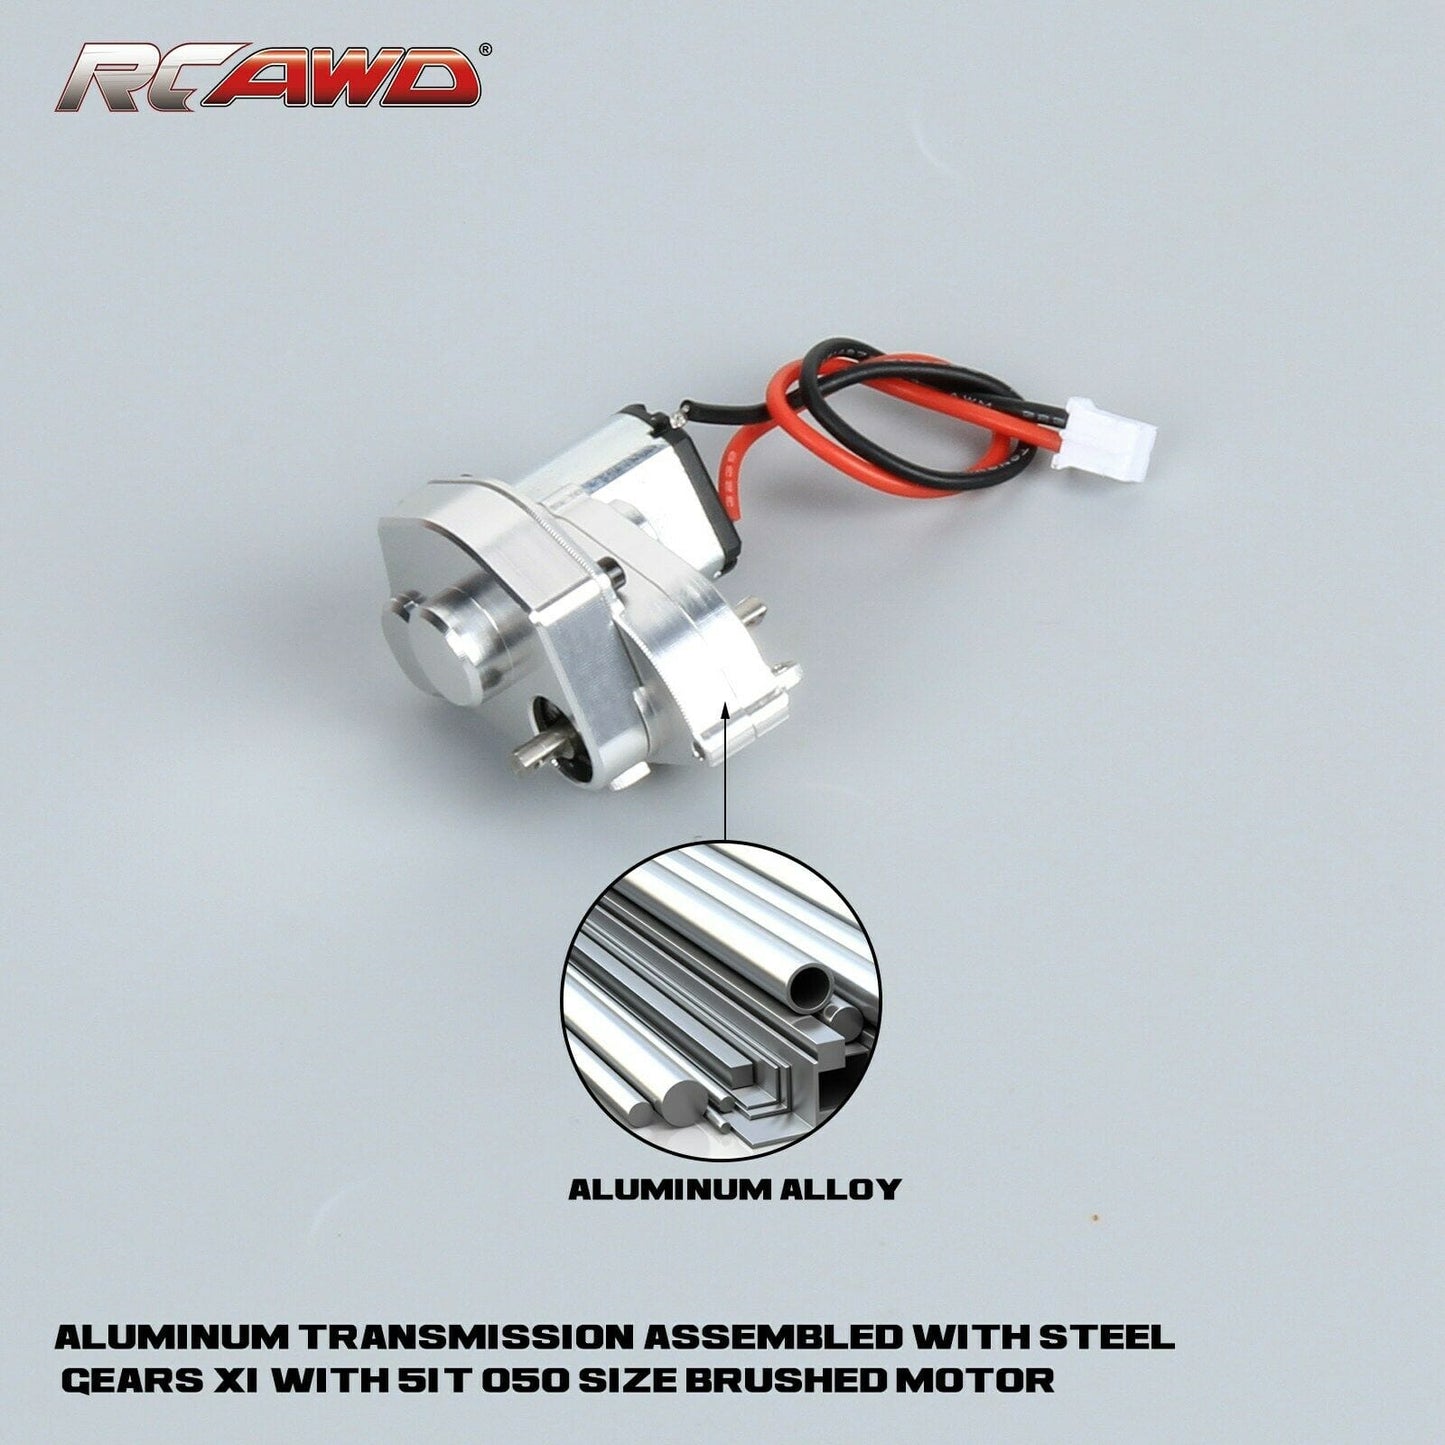 RCAWD SCX24 upgrade 030 55T Motor Full Metal Gearbox Assembled AXI31608 compatiable with AX24 - RCAWD